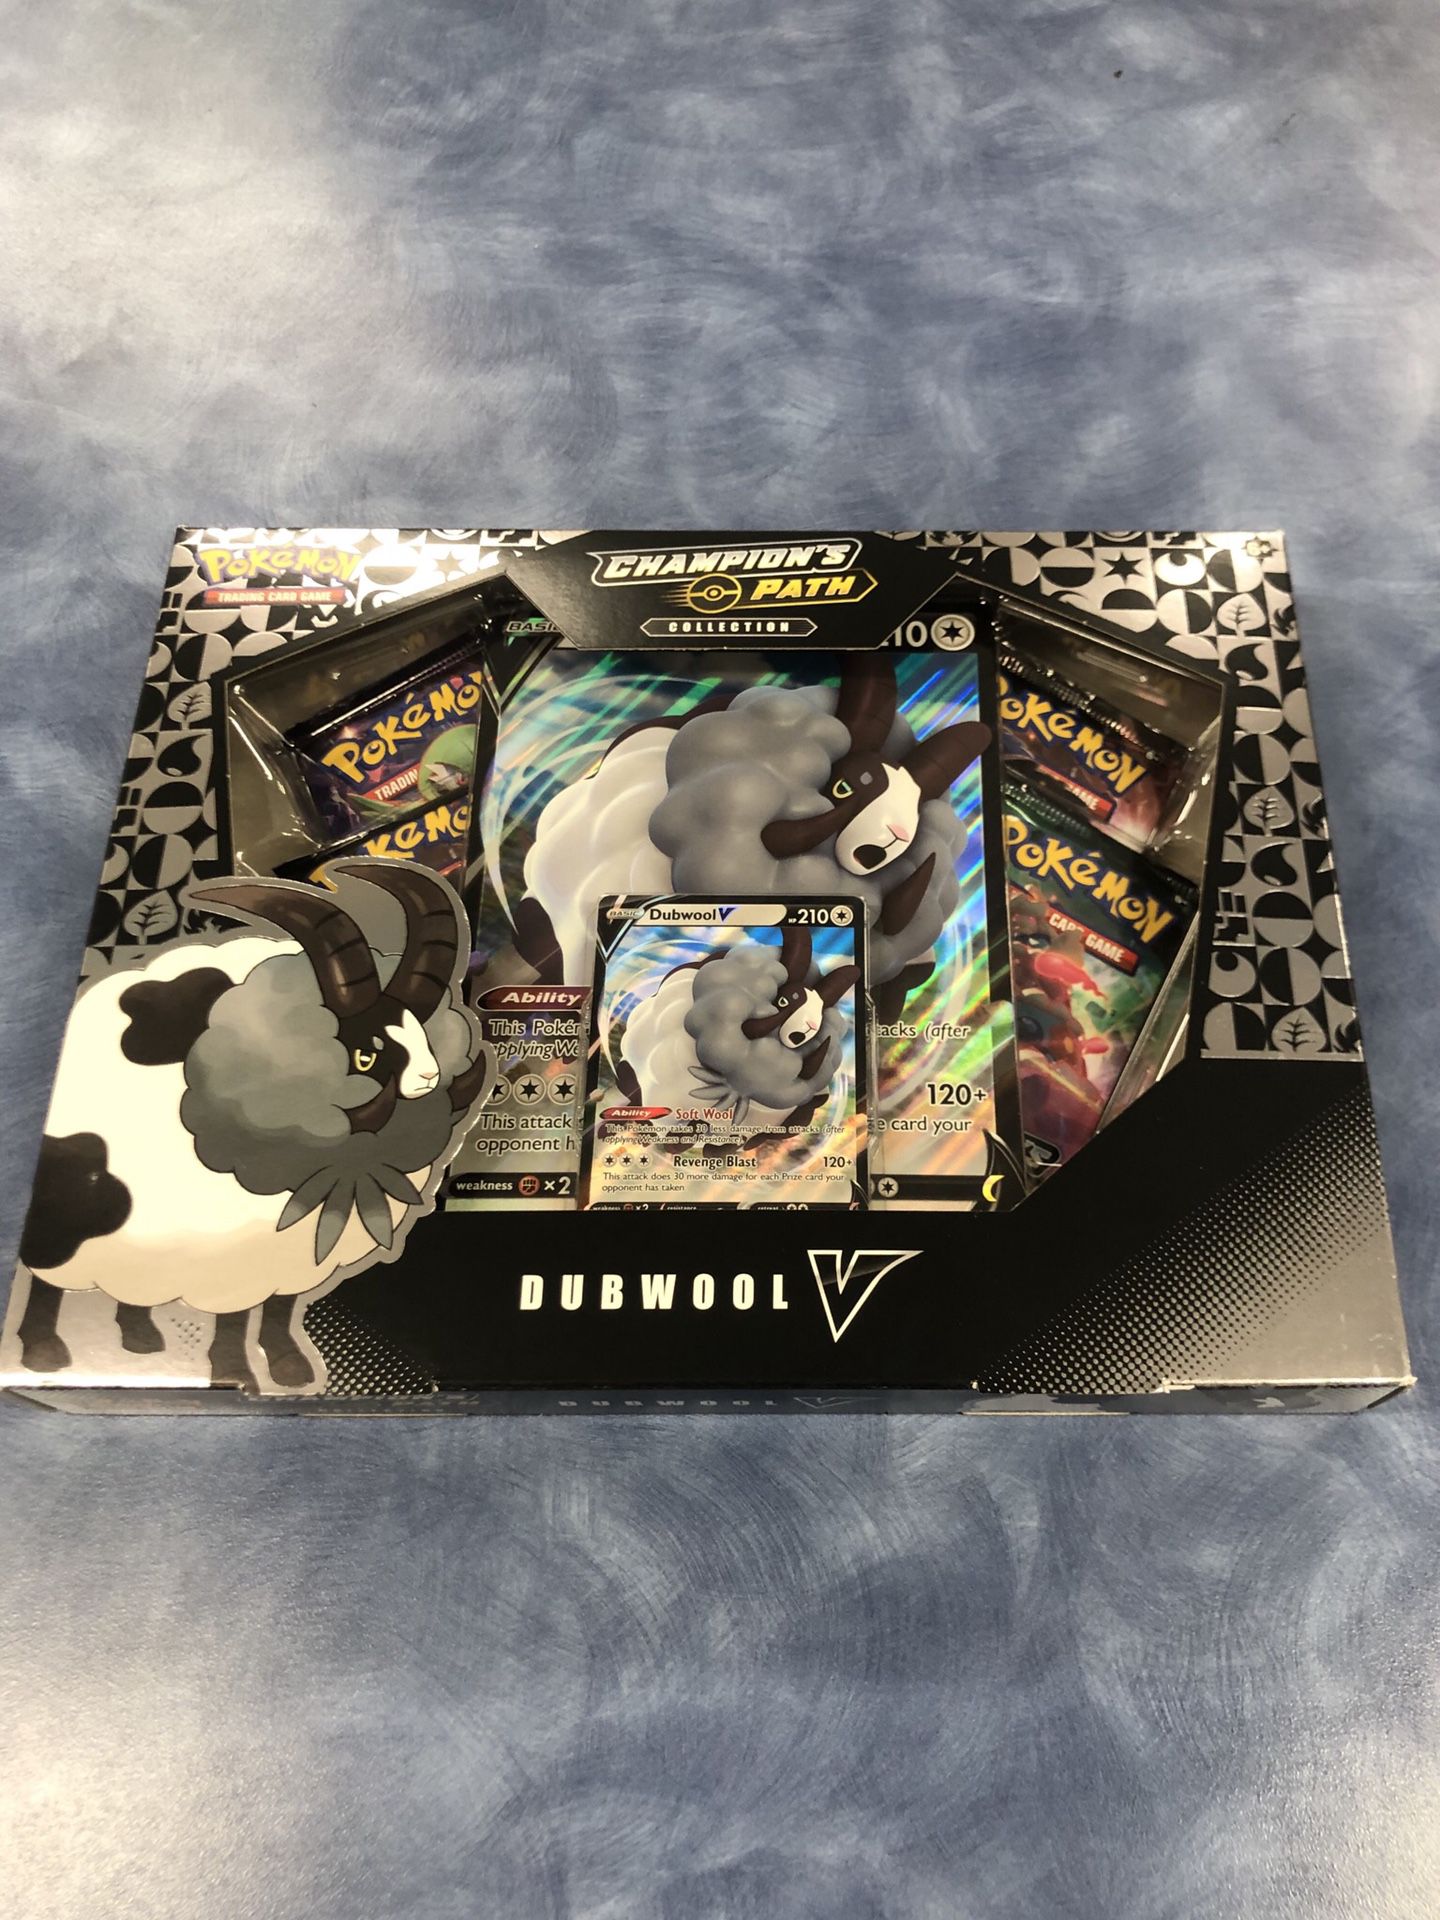 Pokemon TCG Champion's Path Dubwool V Box 4 Booster Packs in hand